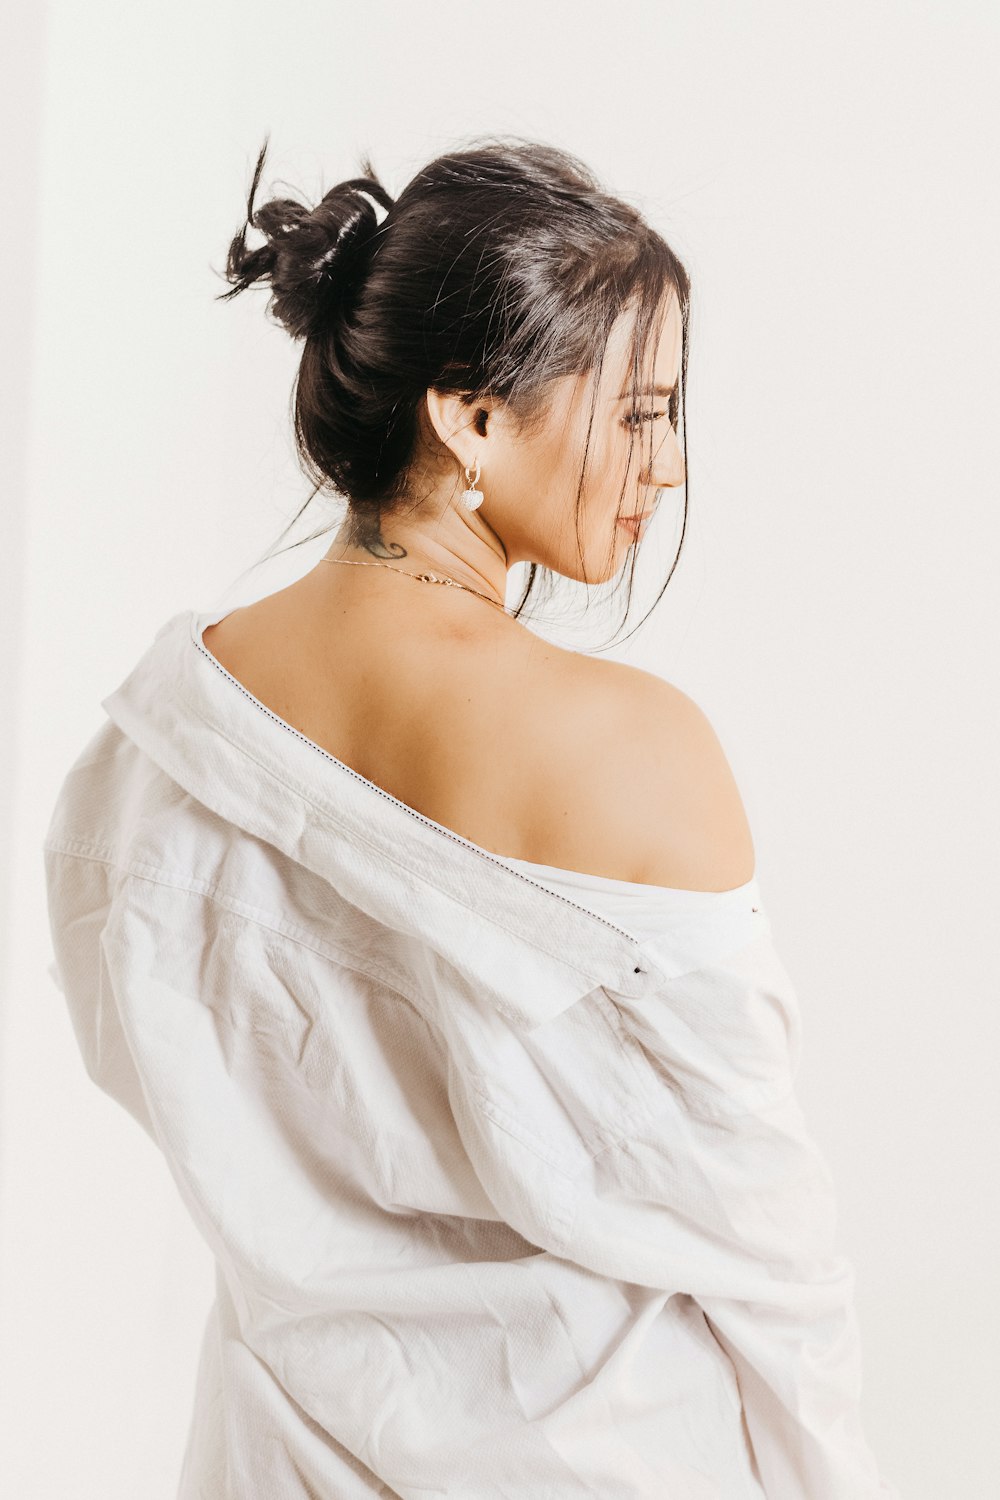 a woman in a white top with a tattoo on her shoulder